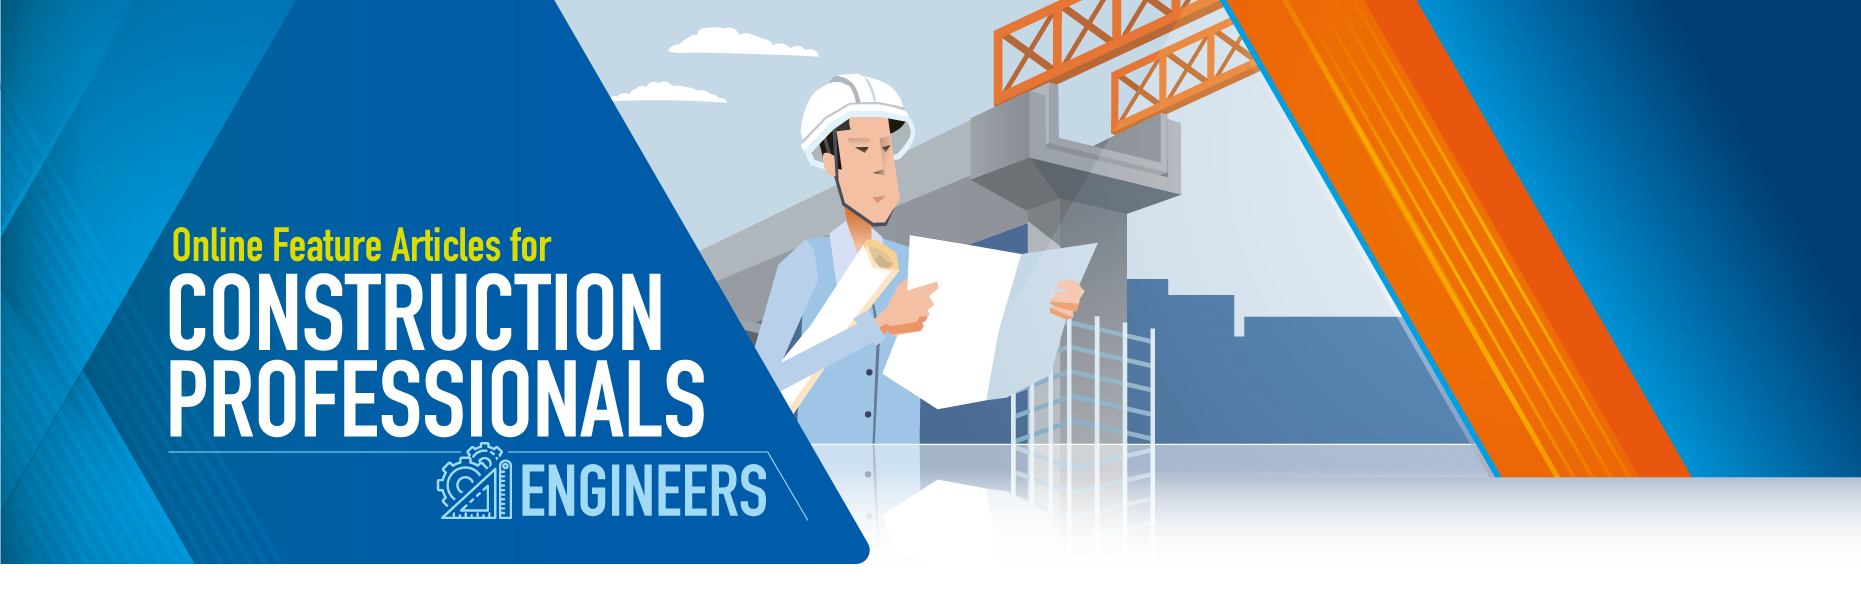 Online Feature Articles for Construction Professionals - Engineers